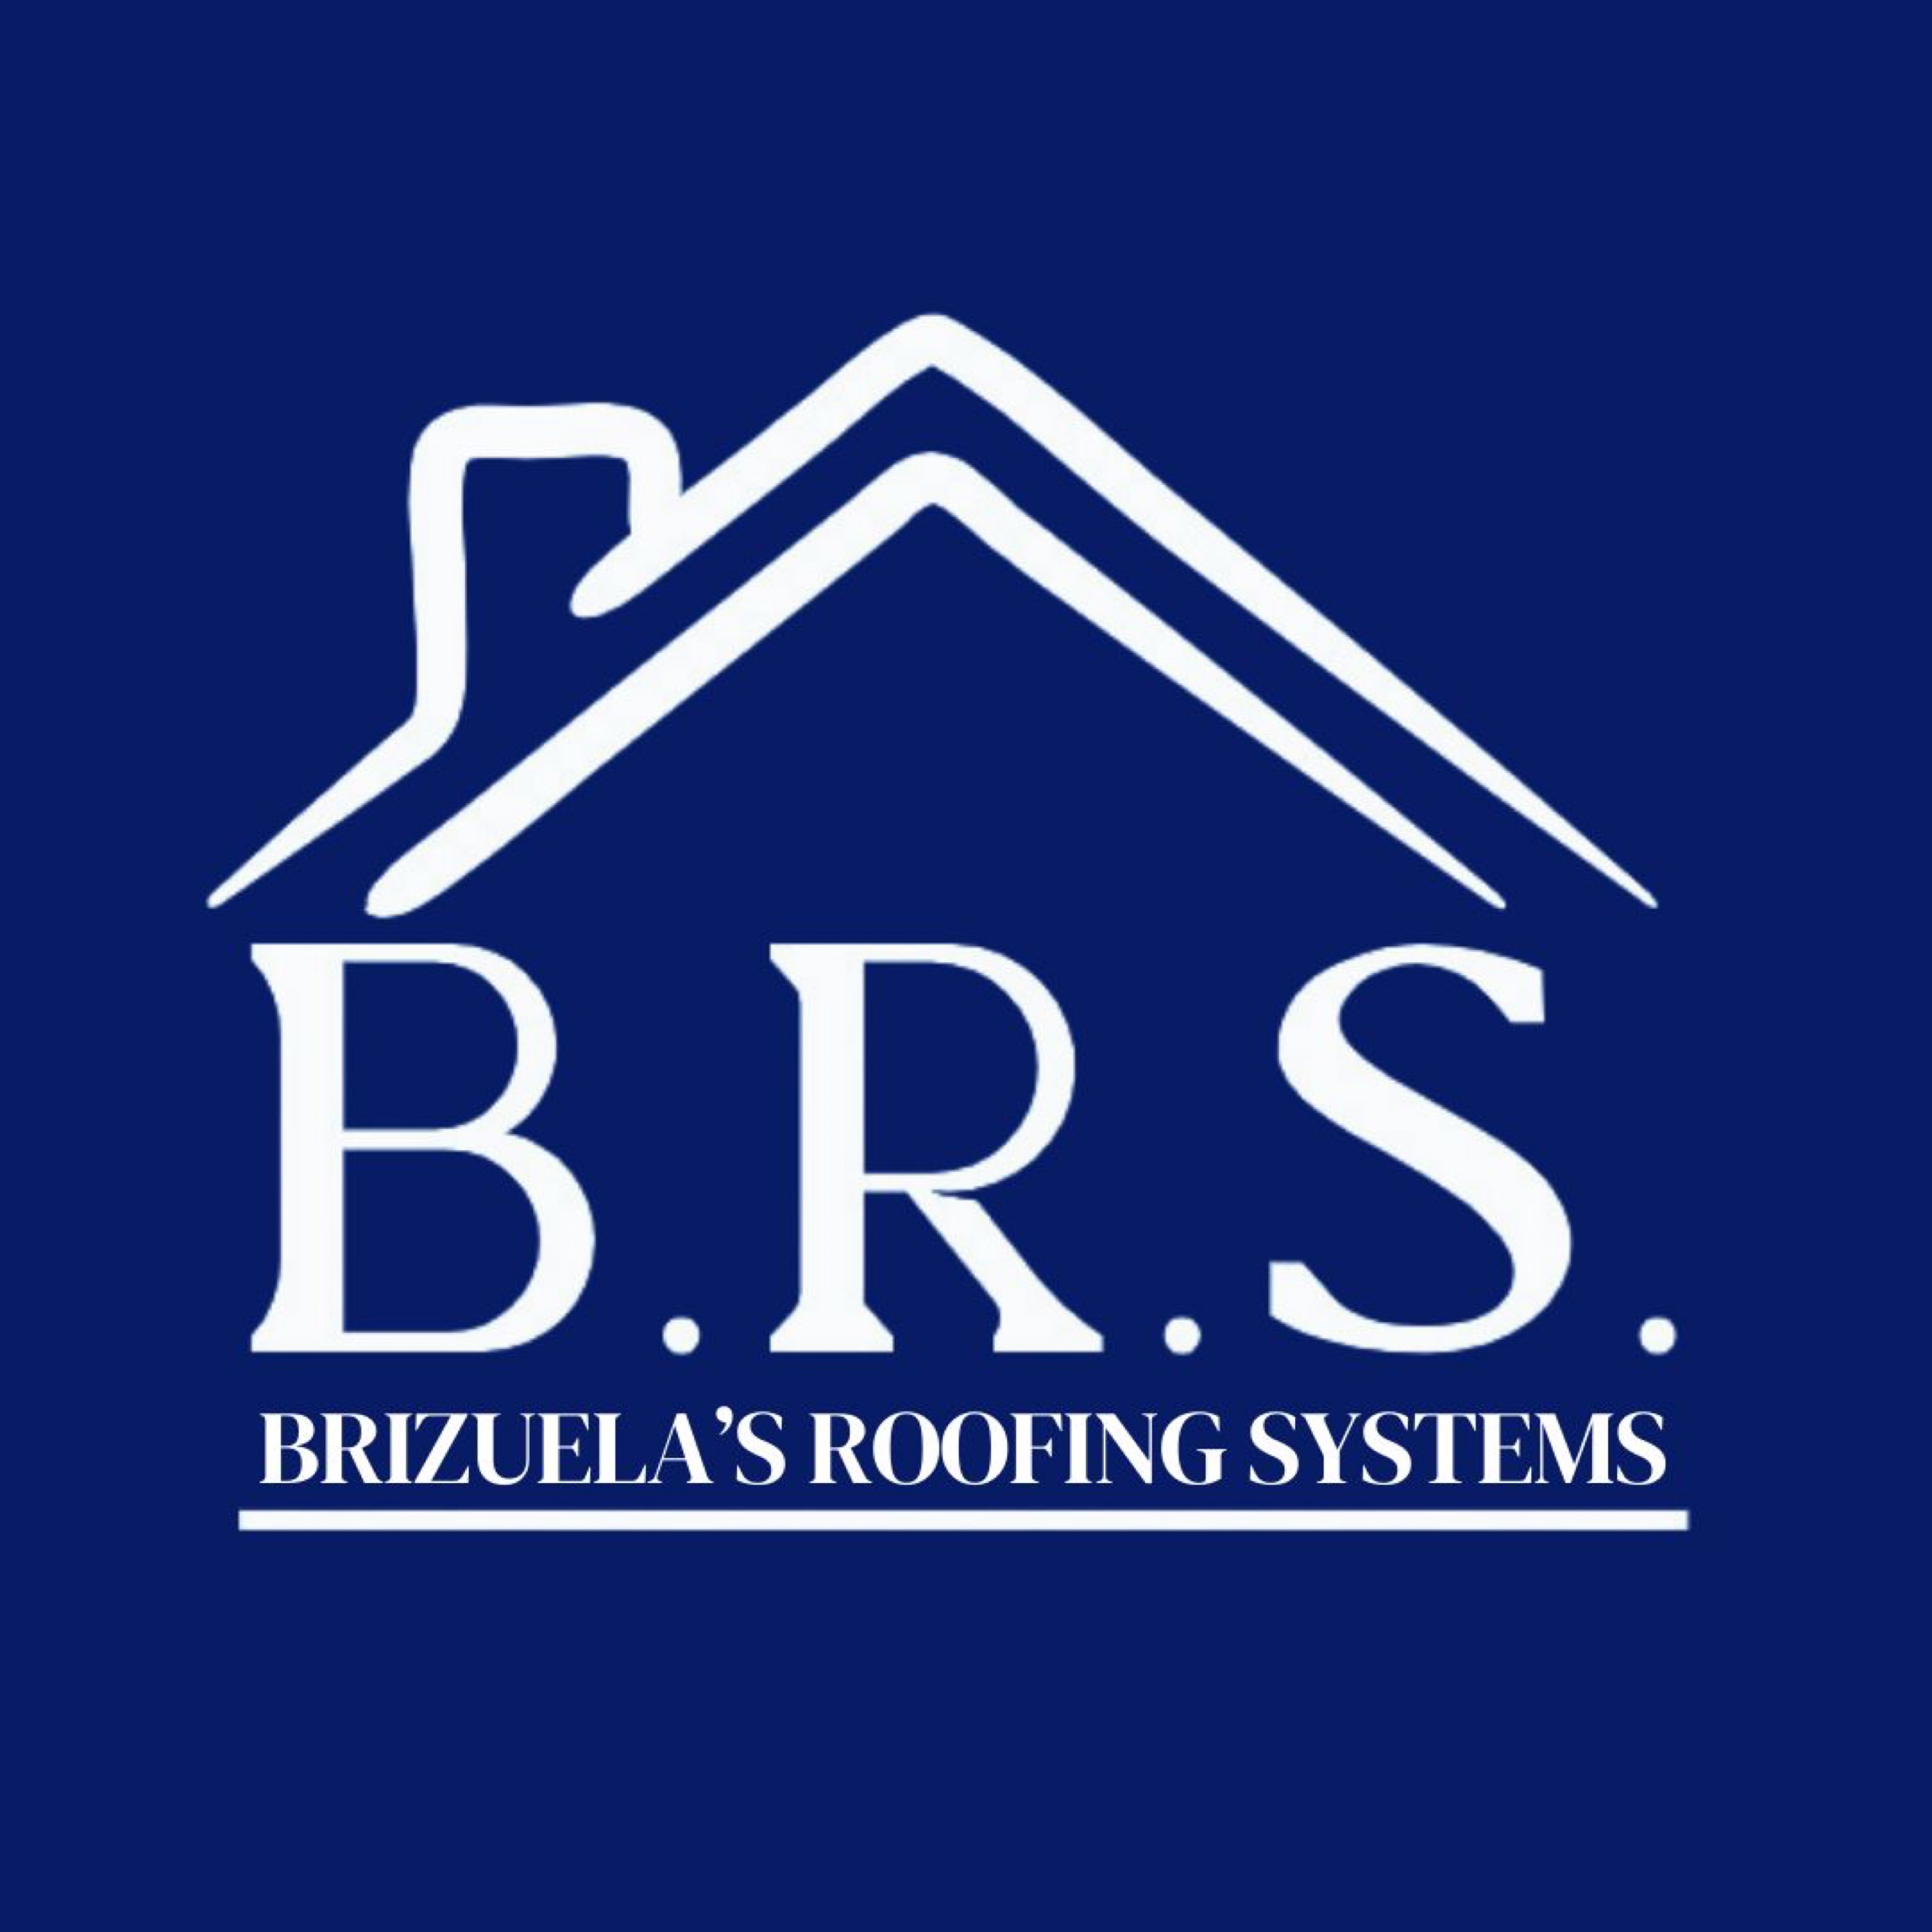 Brizuela's Roofing Systems Logo